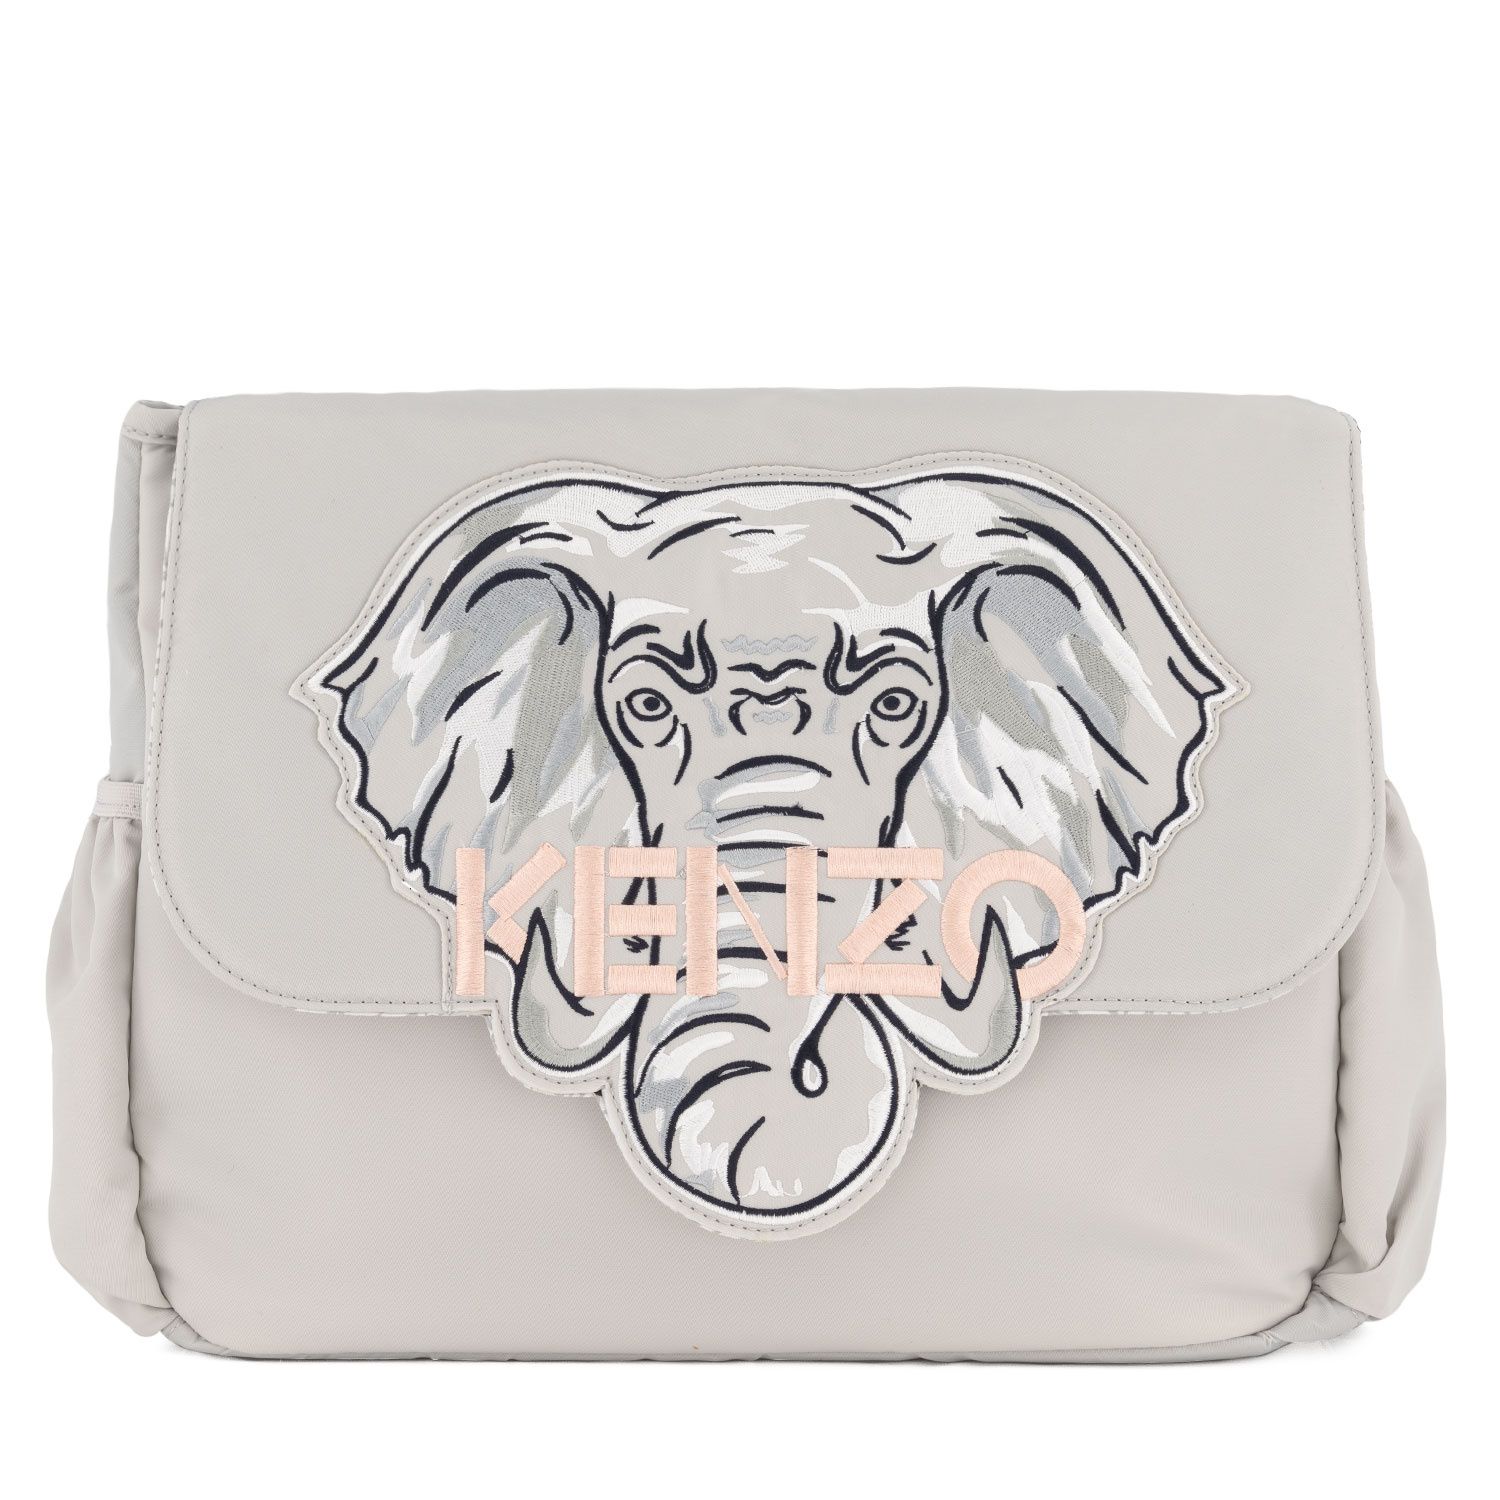 Picture of Kenzo K90089 diaper bags light gray